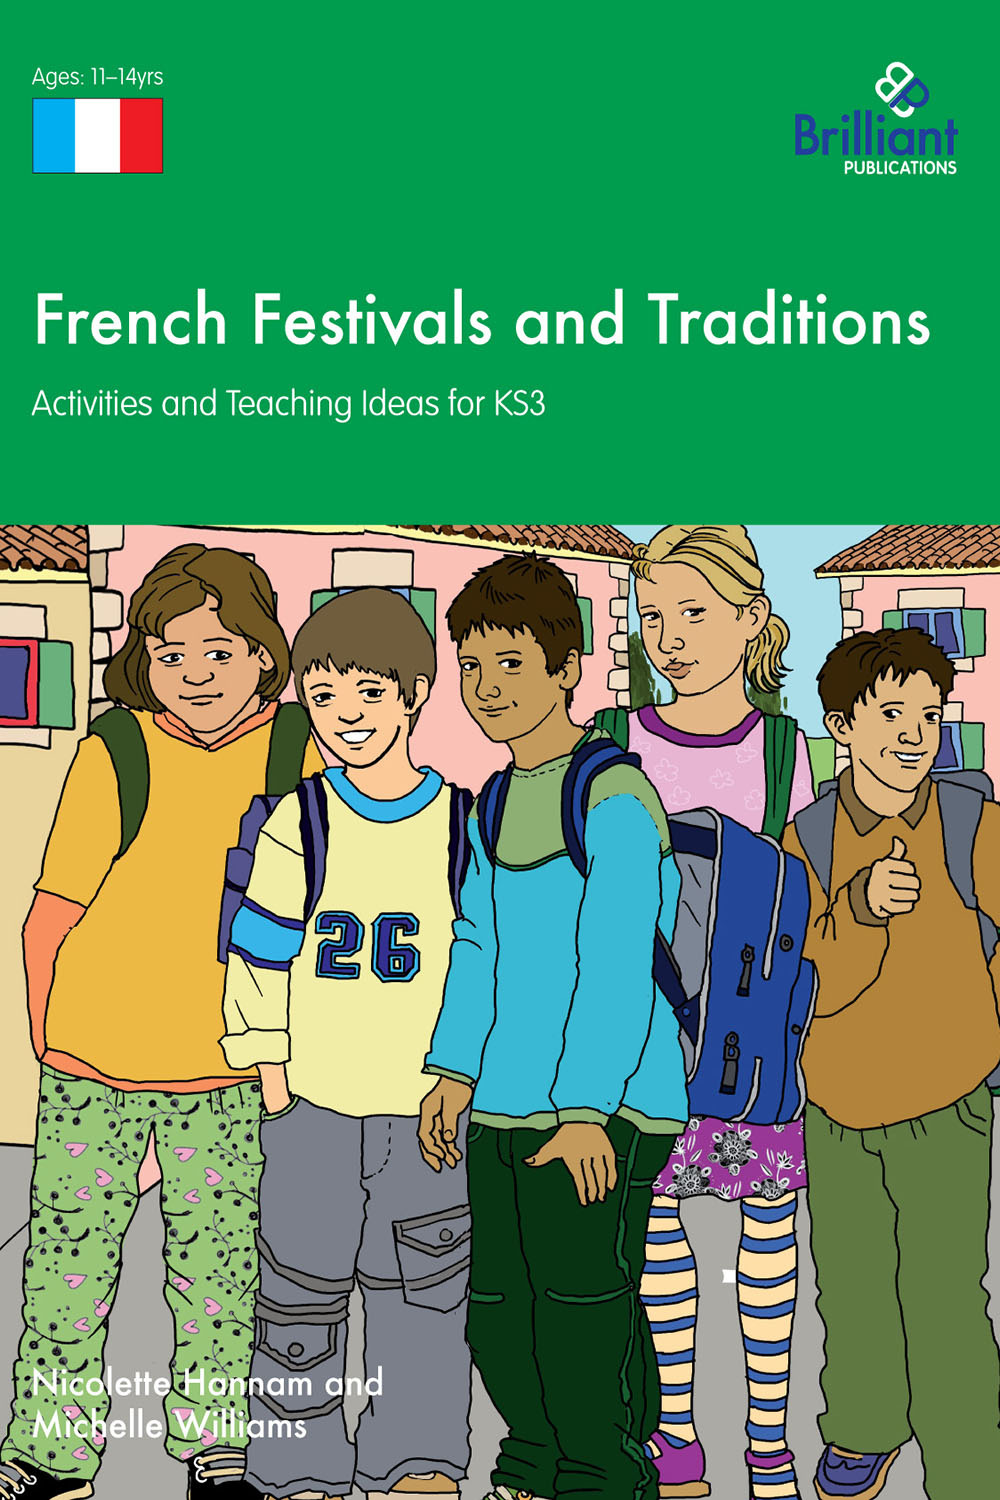 Hannam, Nicolette - French Festivals and Traditions KS3, ebook